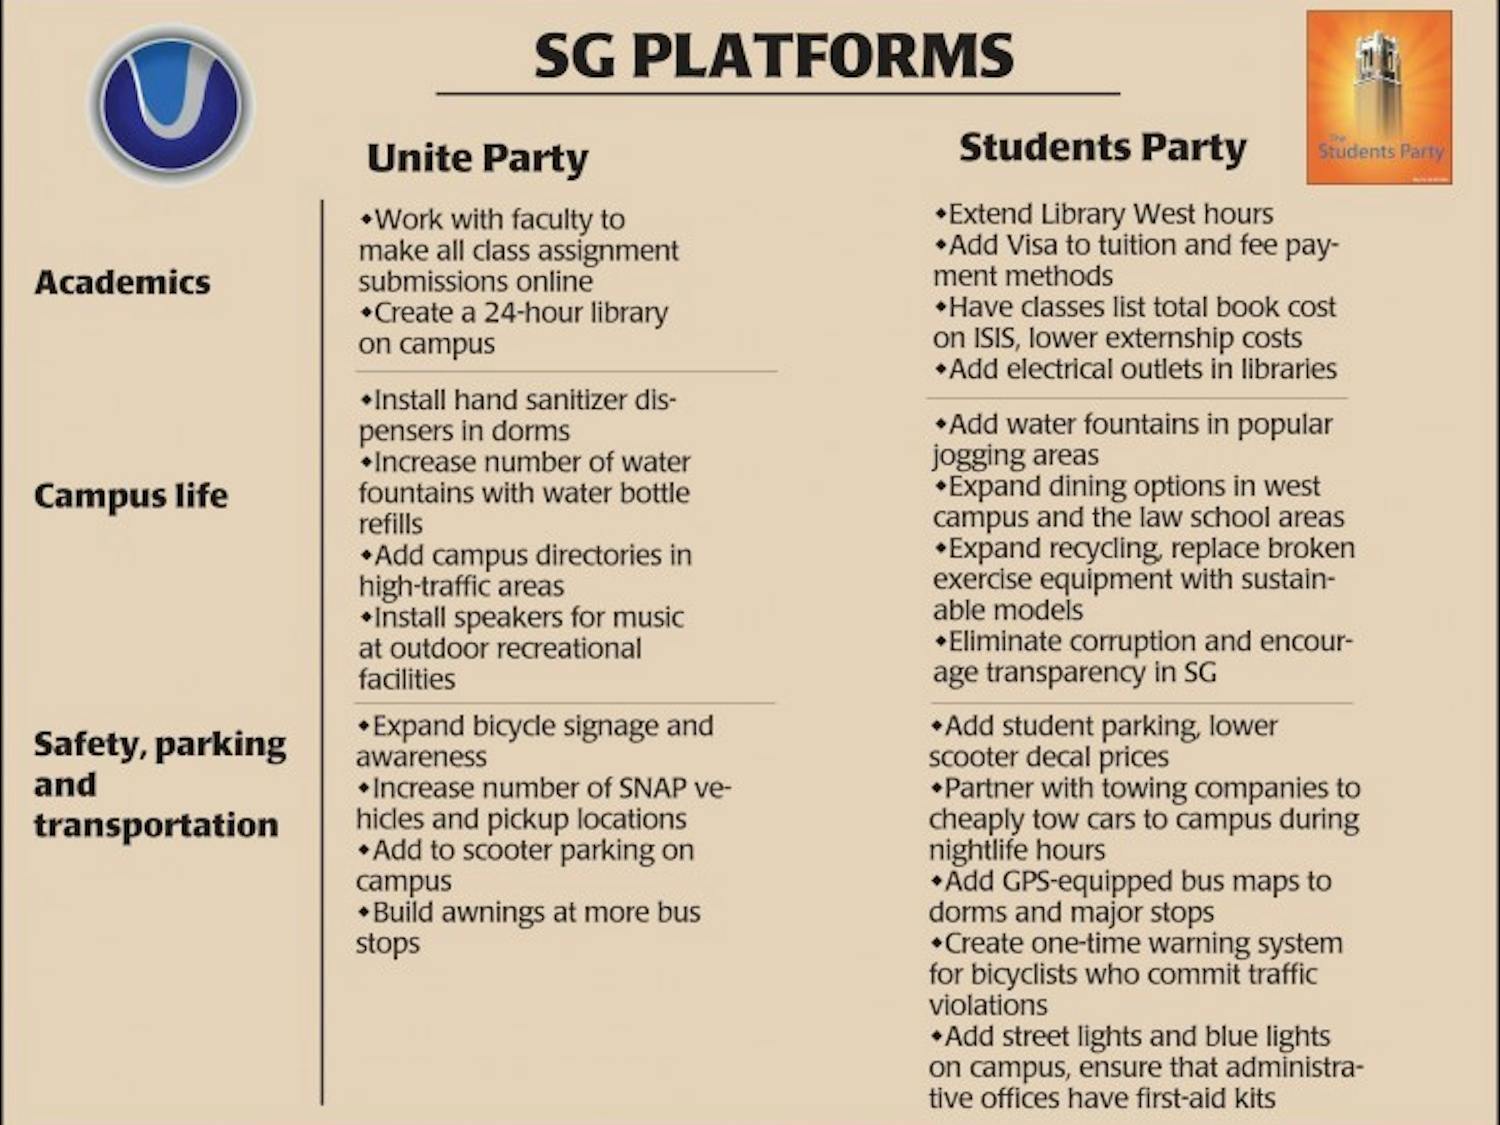 Take a look at the platforms for the&nbsp;Unite Party and the Students&nbsp;Party.